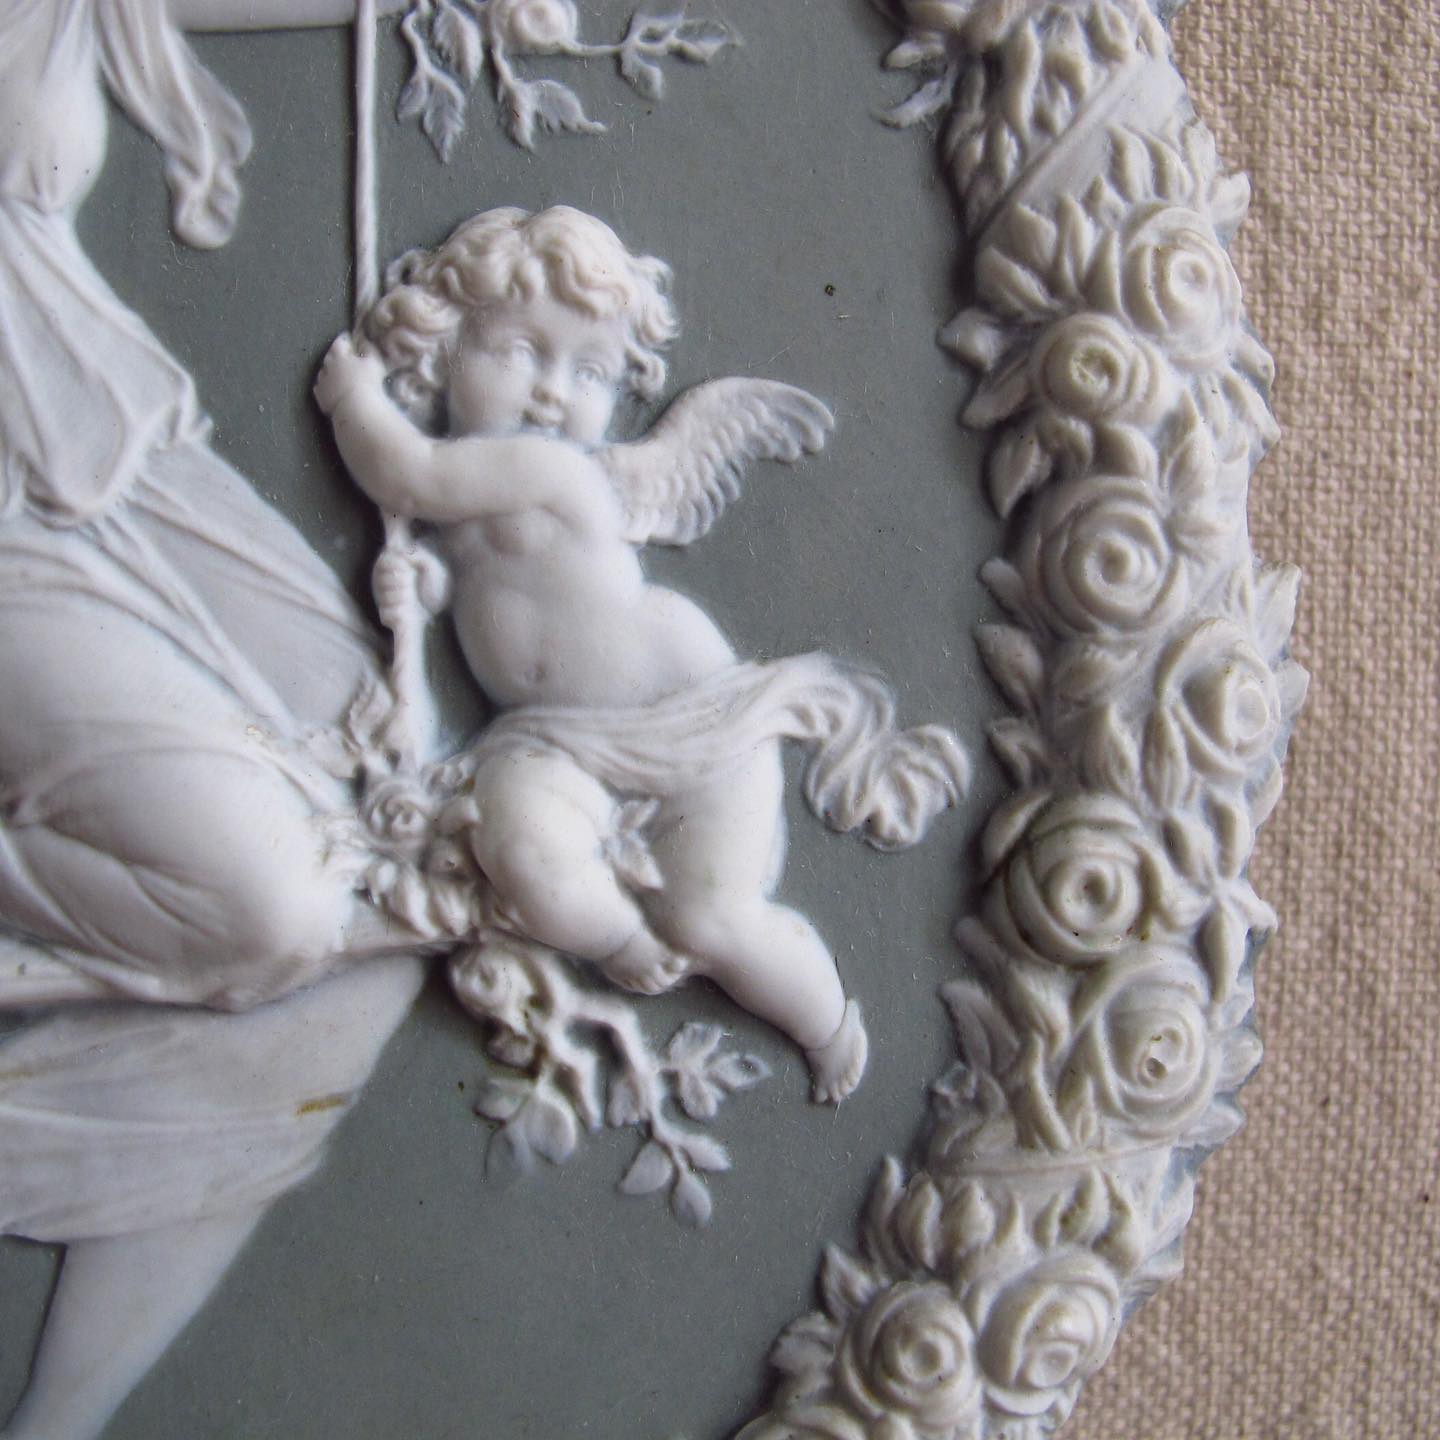 Victorian jasperware bisque relief with maiden and putti / cupid playing on a swing, in the manner of Wedgwood, c. 1890